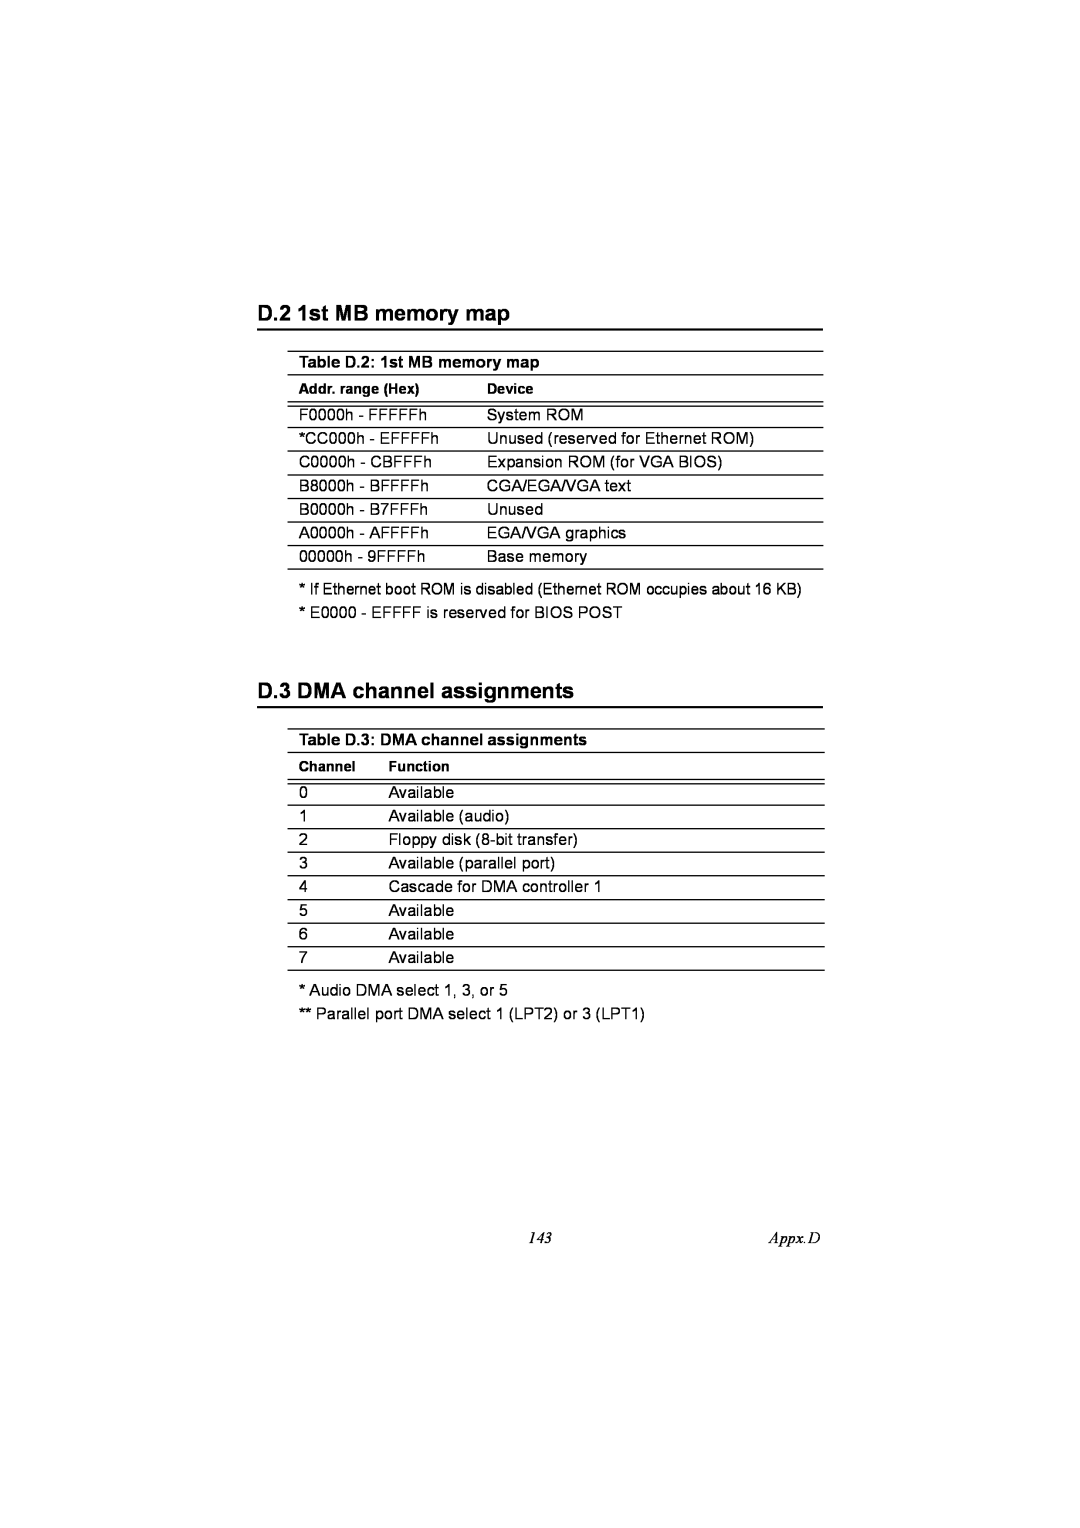 IBM 100/10, PCM-9575 user manual Table D.2 1st MB memory map, Table D.3 DMA channel assignments, Appx.D 